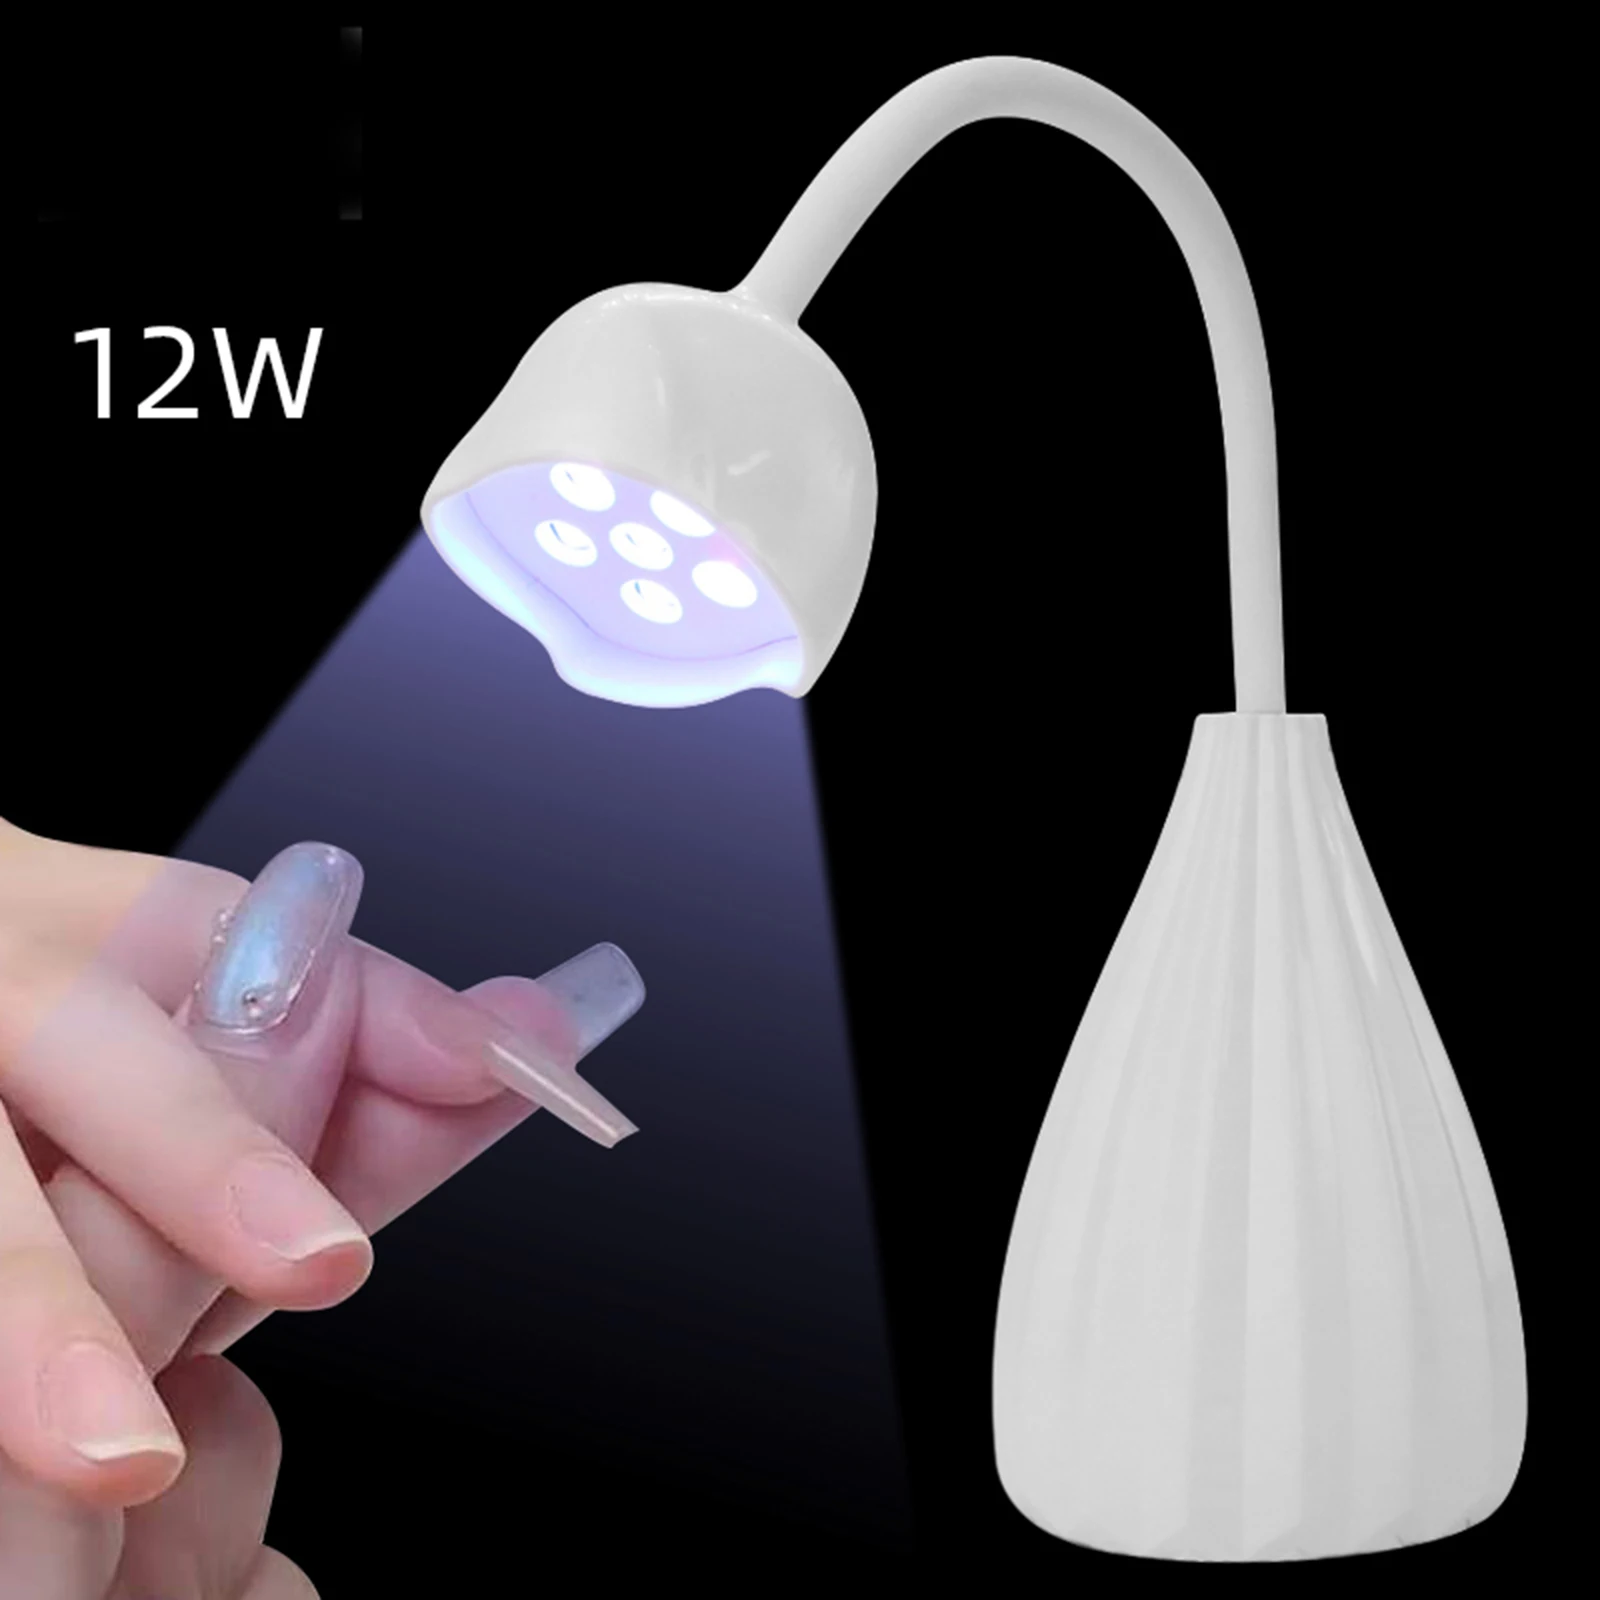 12W LED Nail Lamp Professional Nail Dryer Light Rechargeable Beauty Accessories Supplies Tools for Nail Art Salon Home Travel